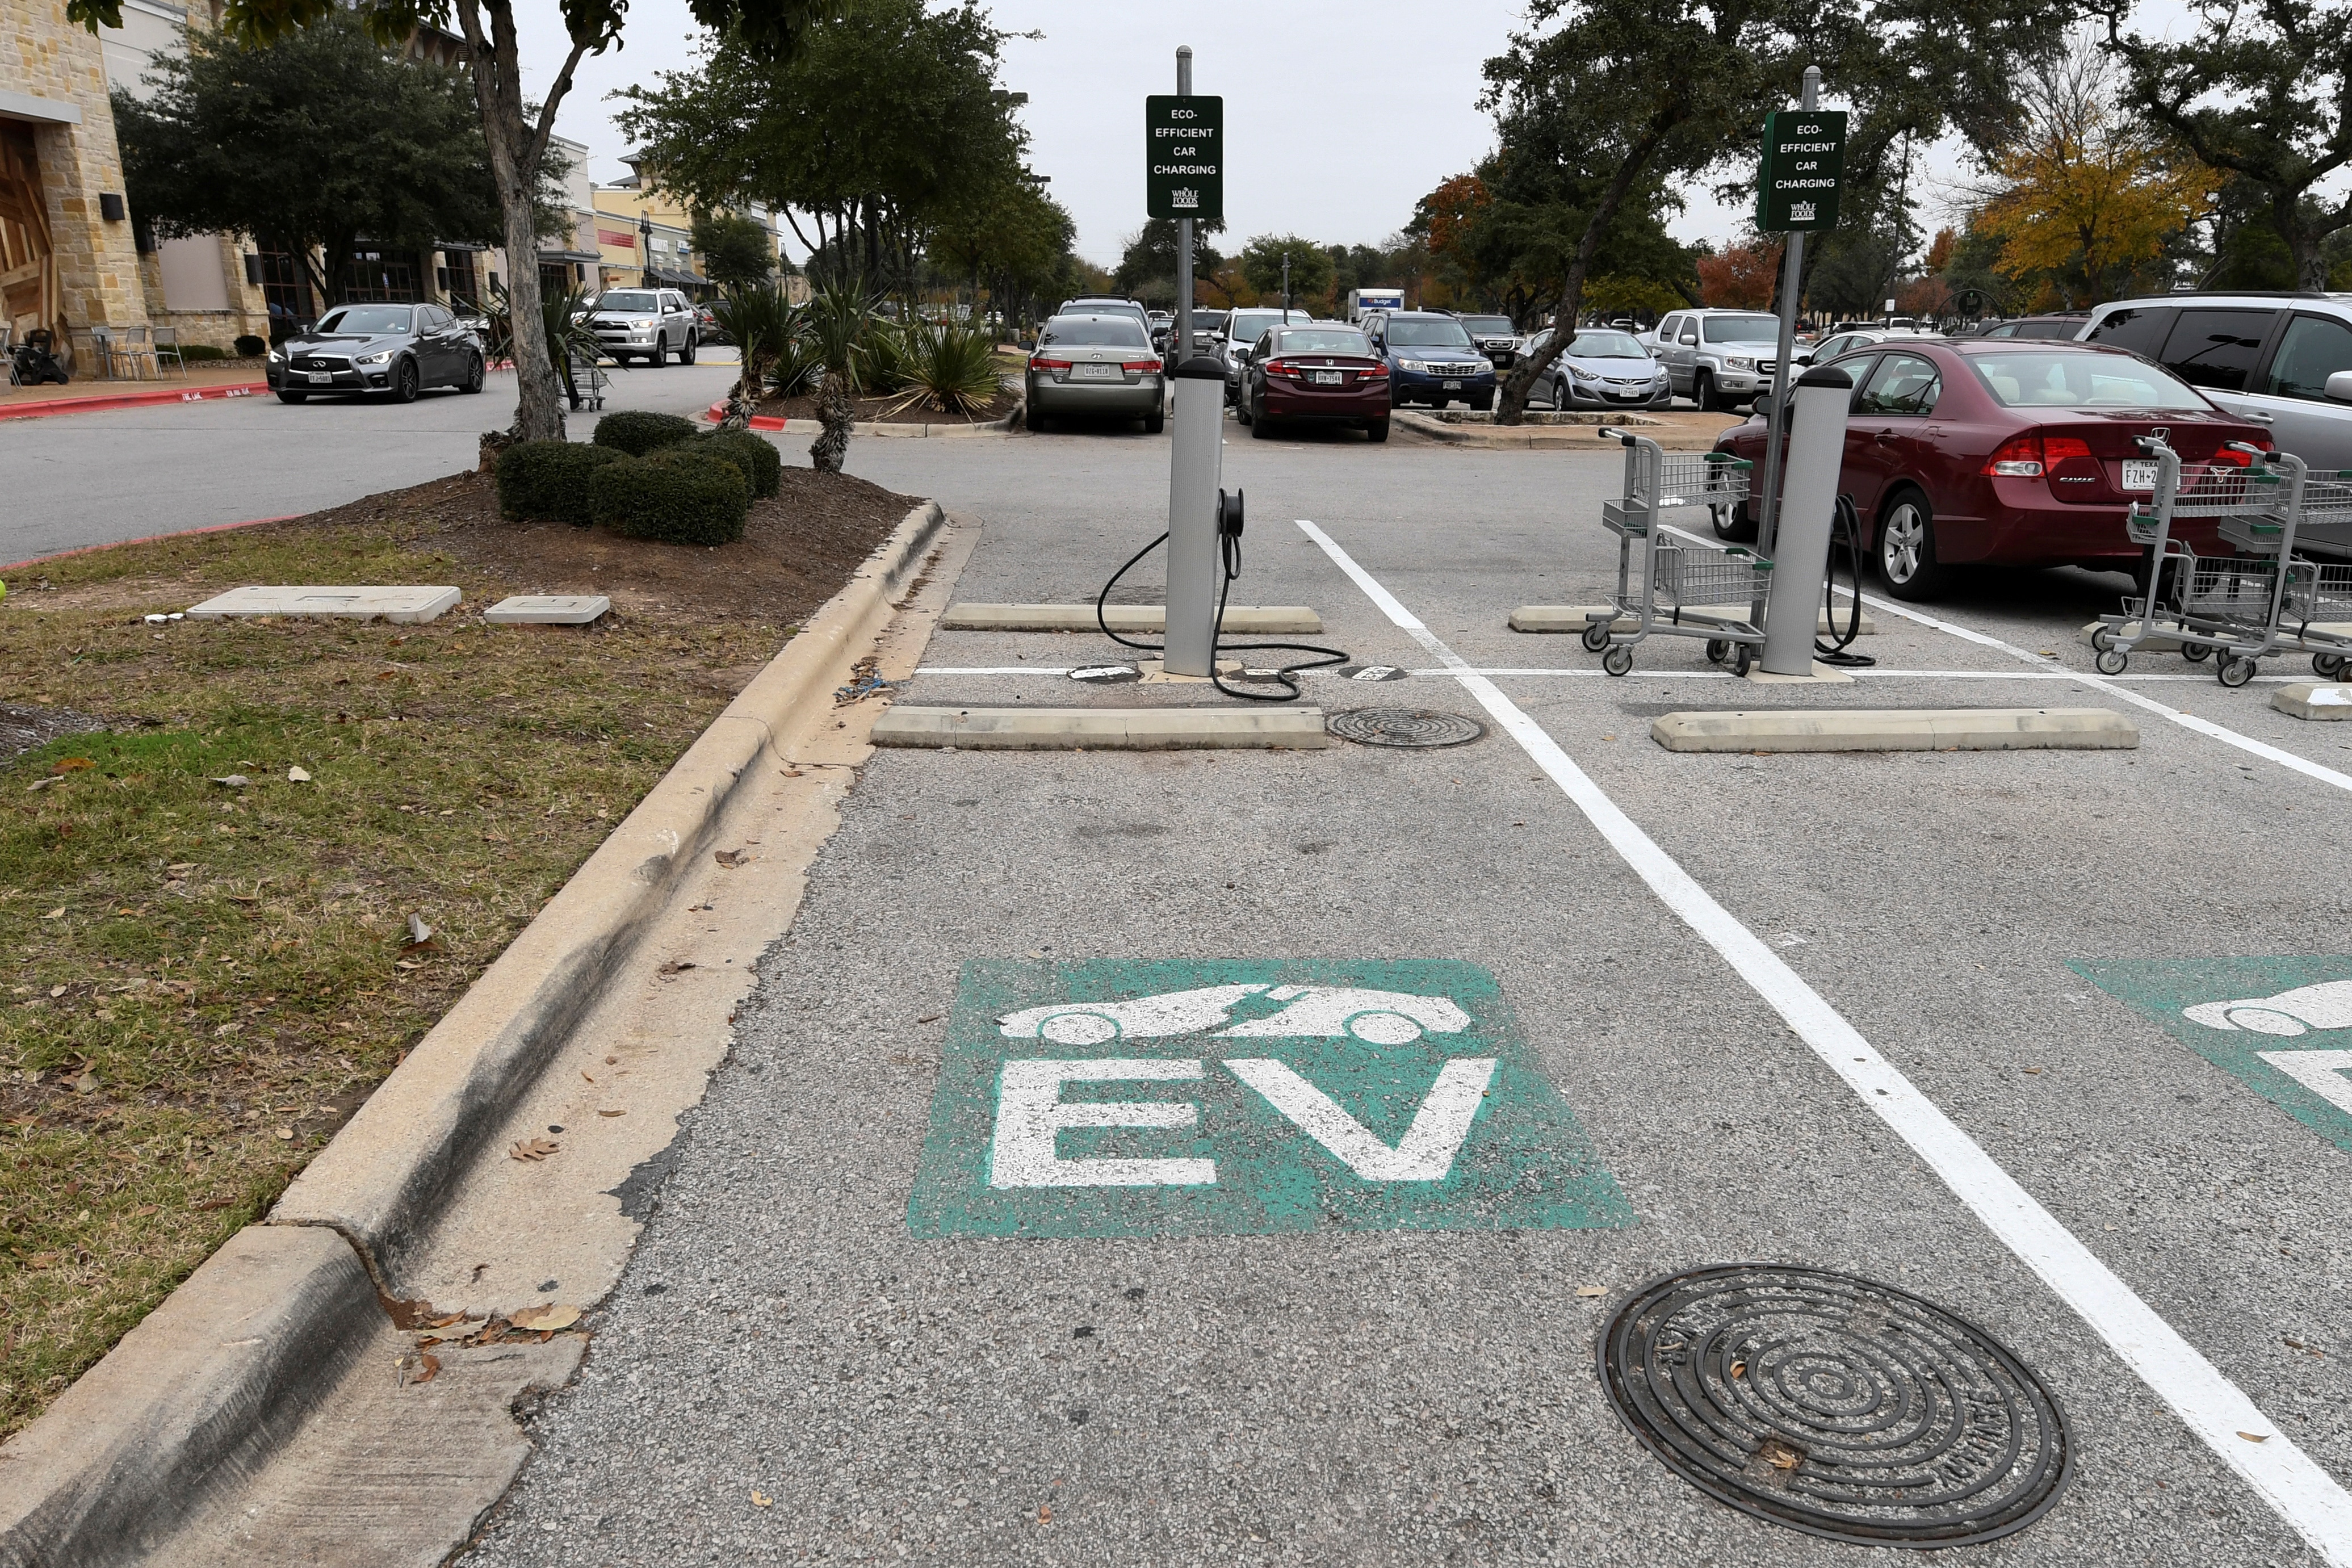 An electric vehicle (EV) fast charging station is seen in the parking lot of a Whole Foods Market in Austin, Texas.